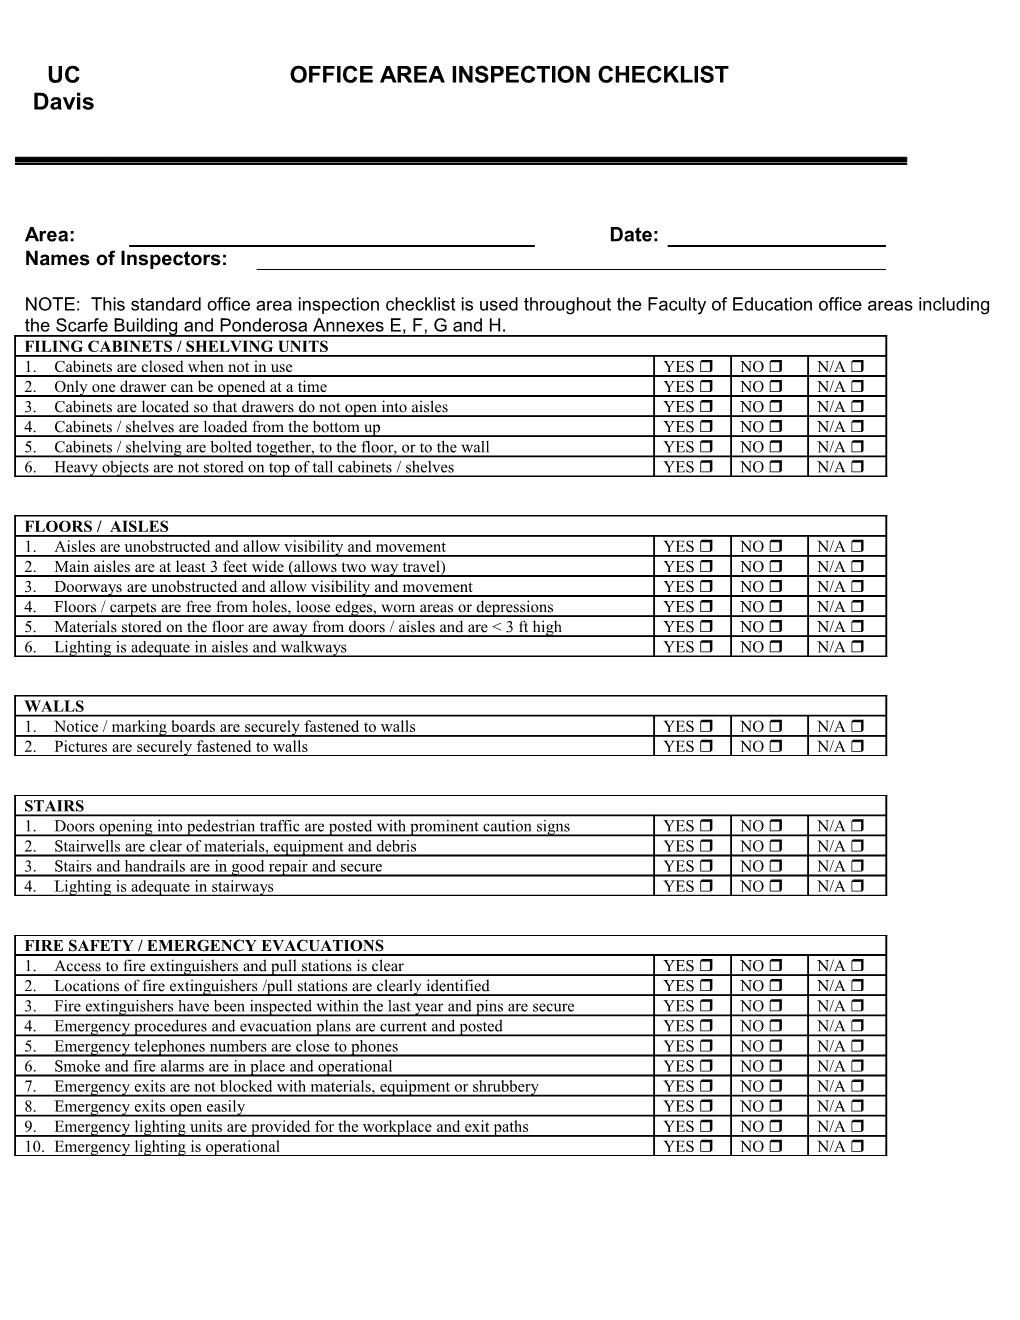 NOTE: This Standard Office Area Inspection Checklist Is Used Throughout the Faculty Of